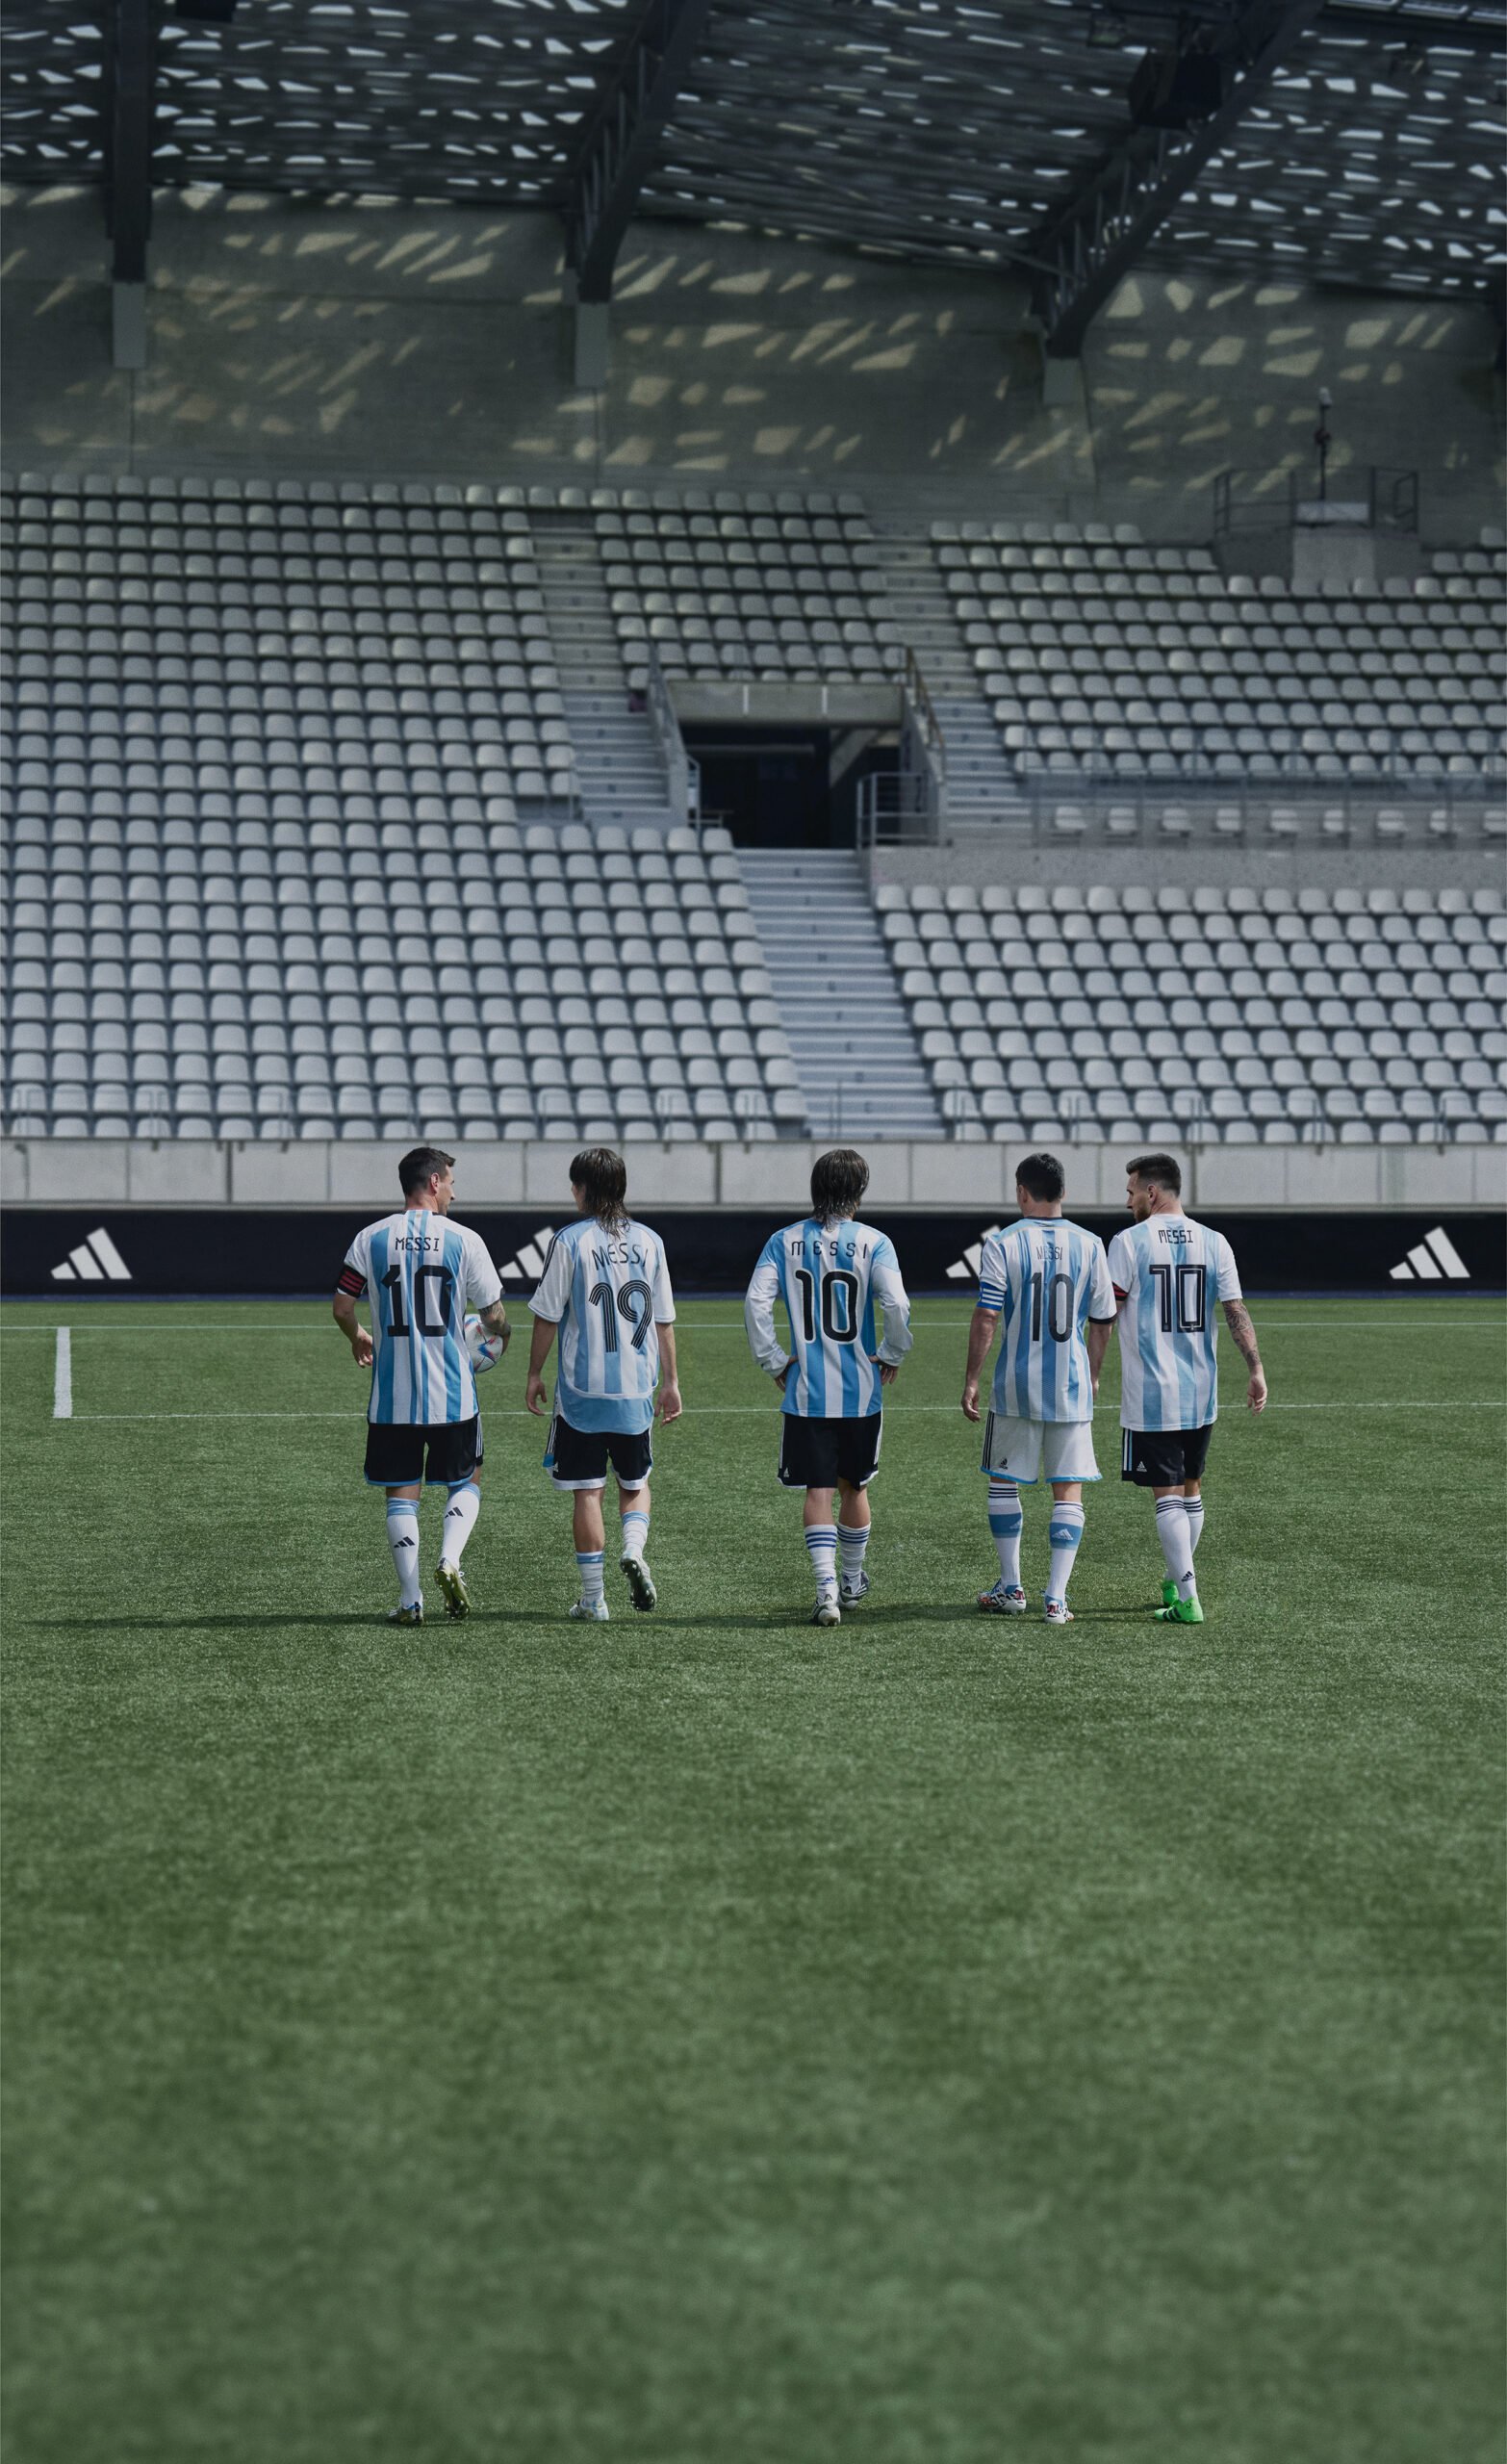 ON THE EVE OF THE FINAL WORLD CUP MESSI™ ADIDAS SHOWS FANS WHEN THE GREATEST OF TIME IS COMING THERE'S NO IMPOSSIBLE